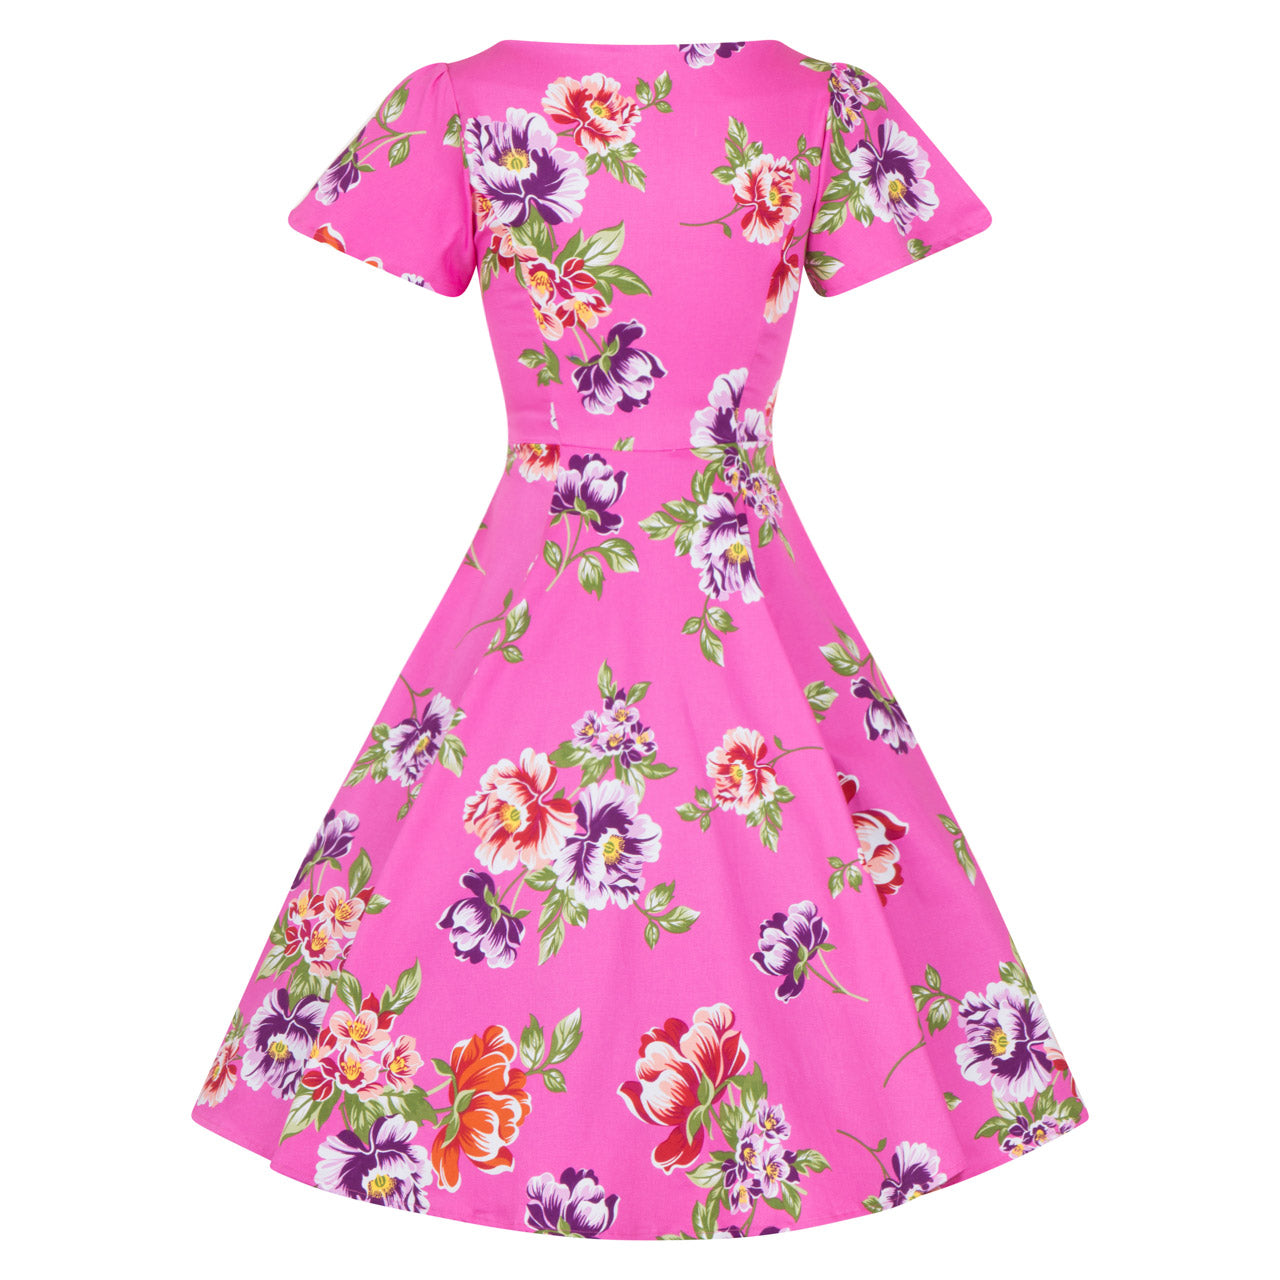 Vintage Style Dresses - 40s & 50s Inspired | Pretty Kitty Fashion Page 13